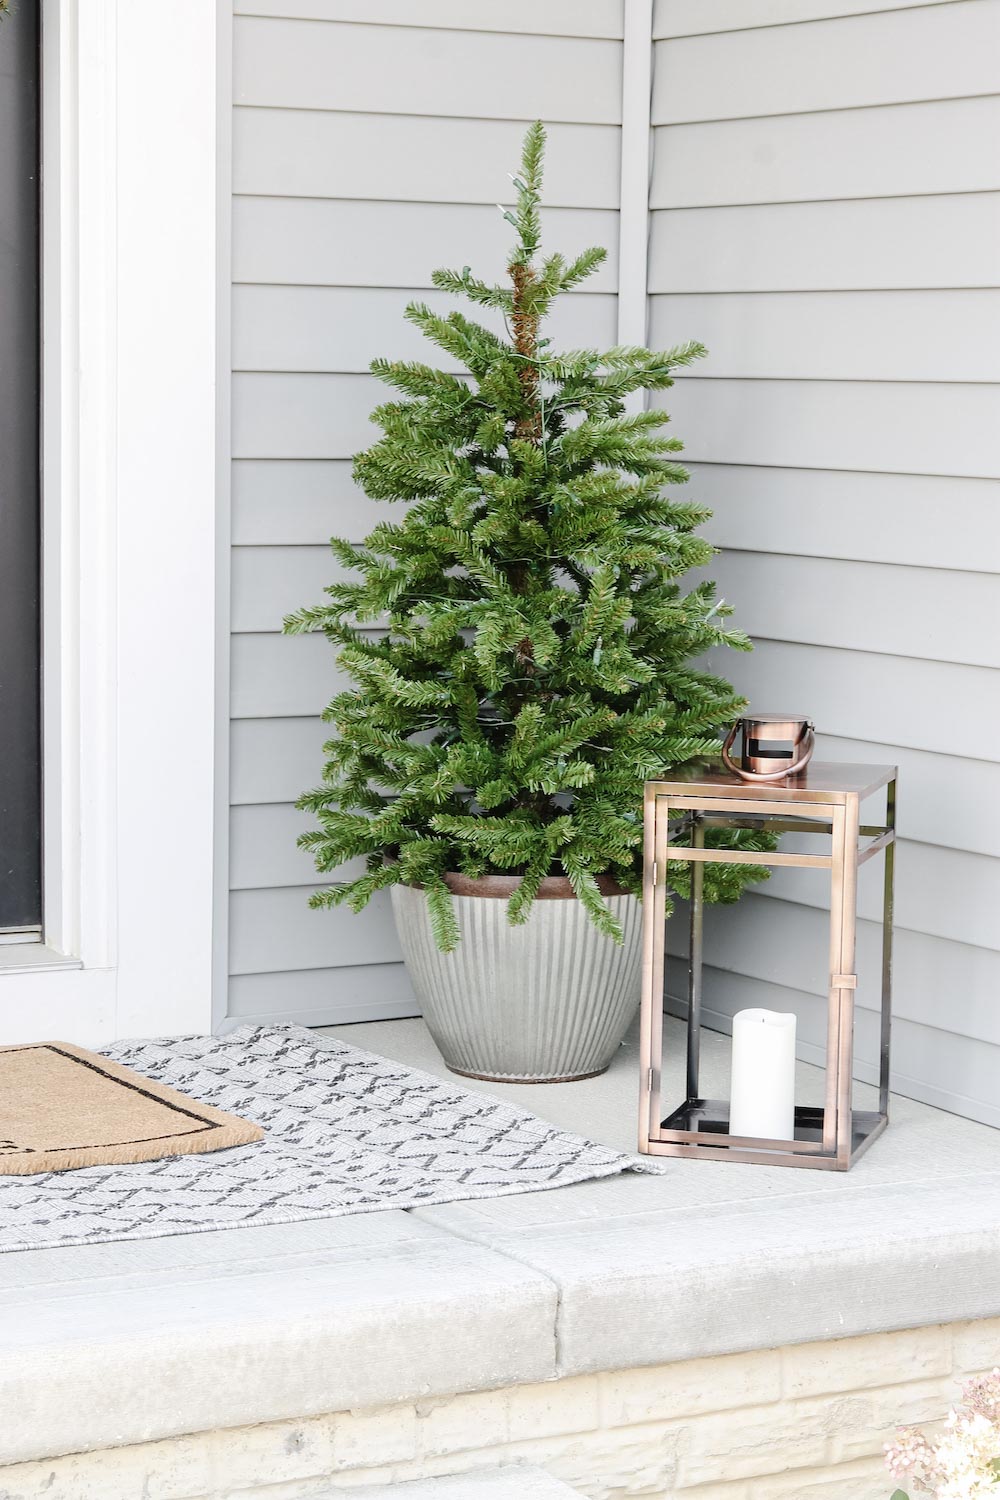 A plain porch tree is styled next to bronze lantern with candle